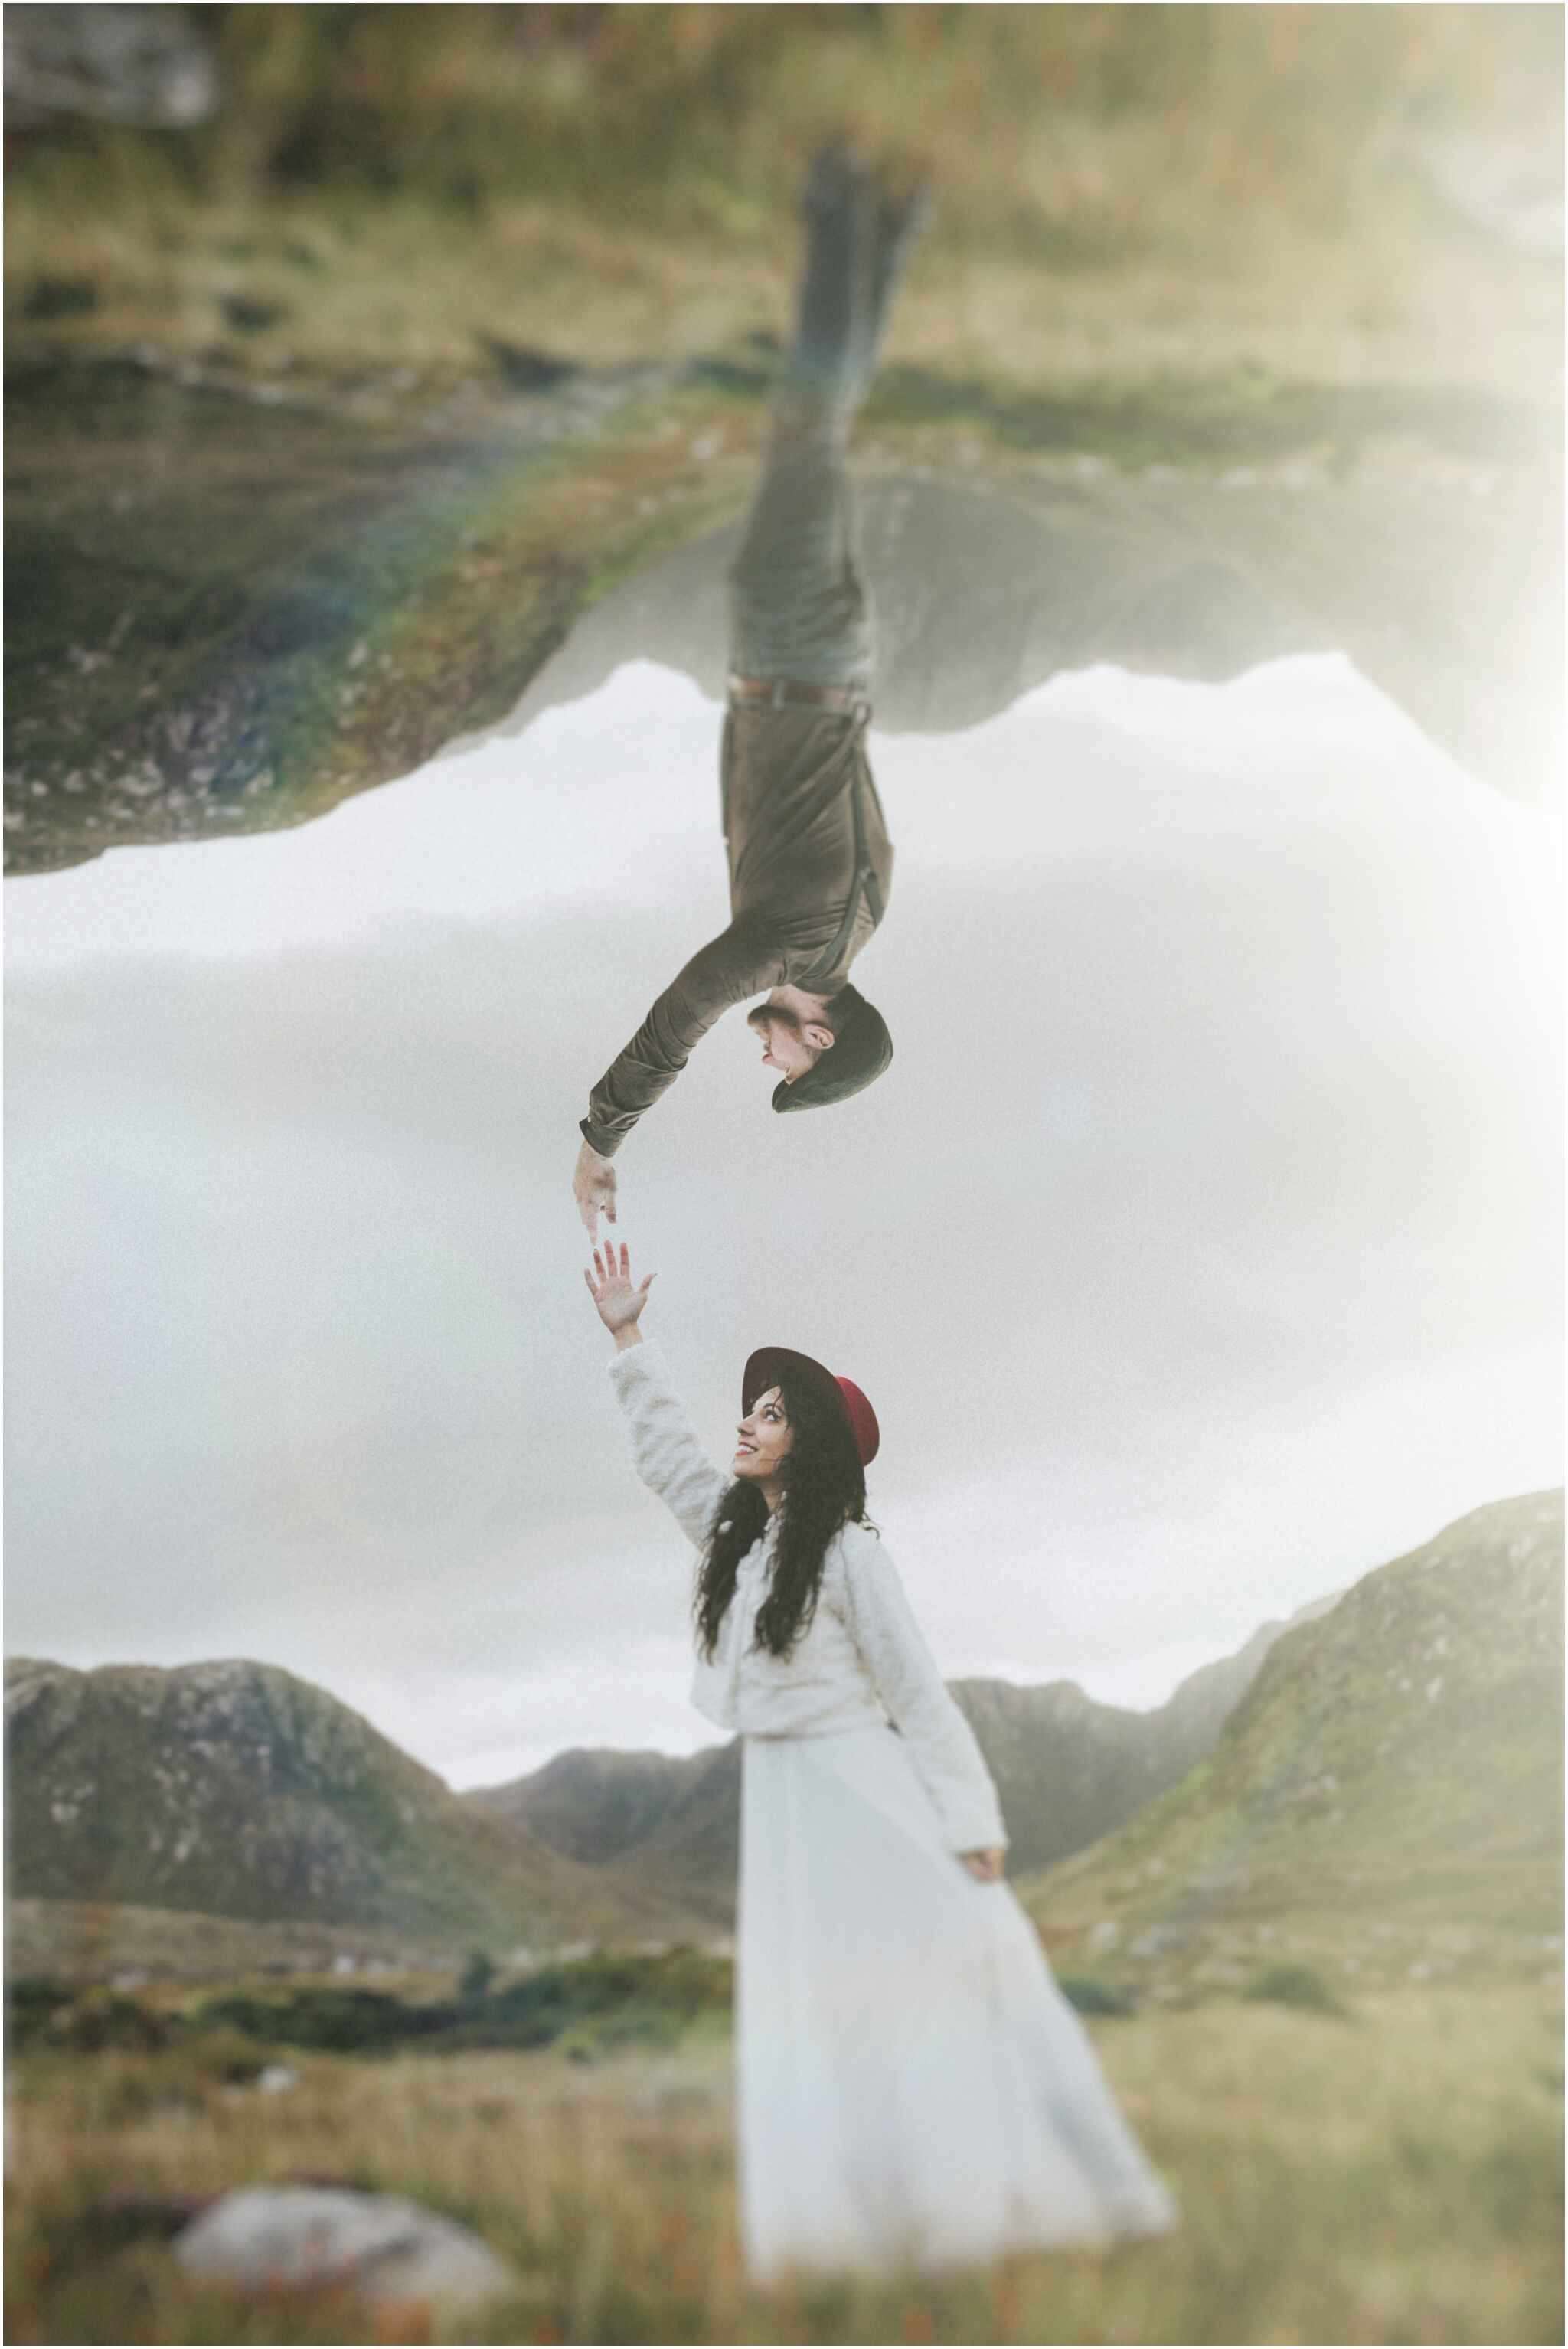 eloping in ireland - Muckish Mountain, Donegal